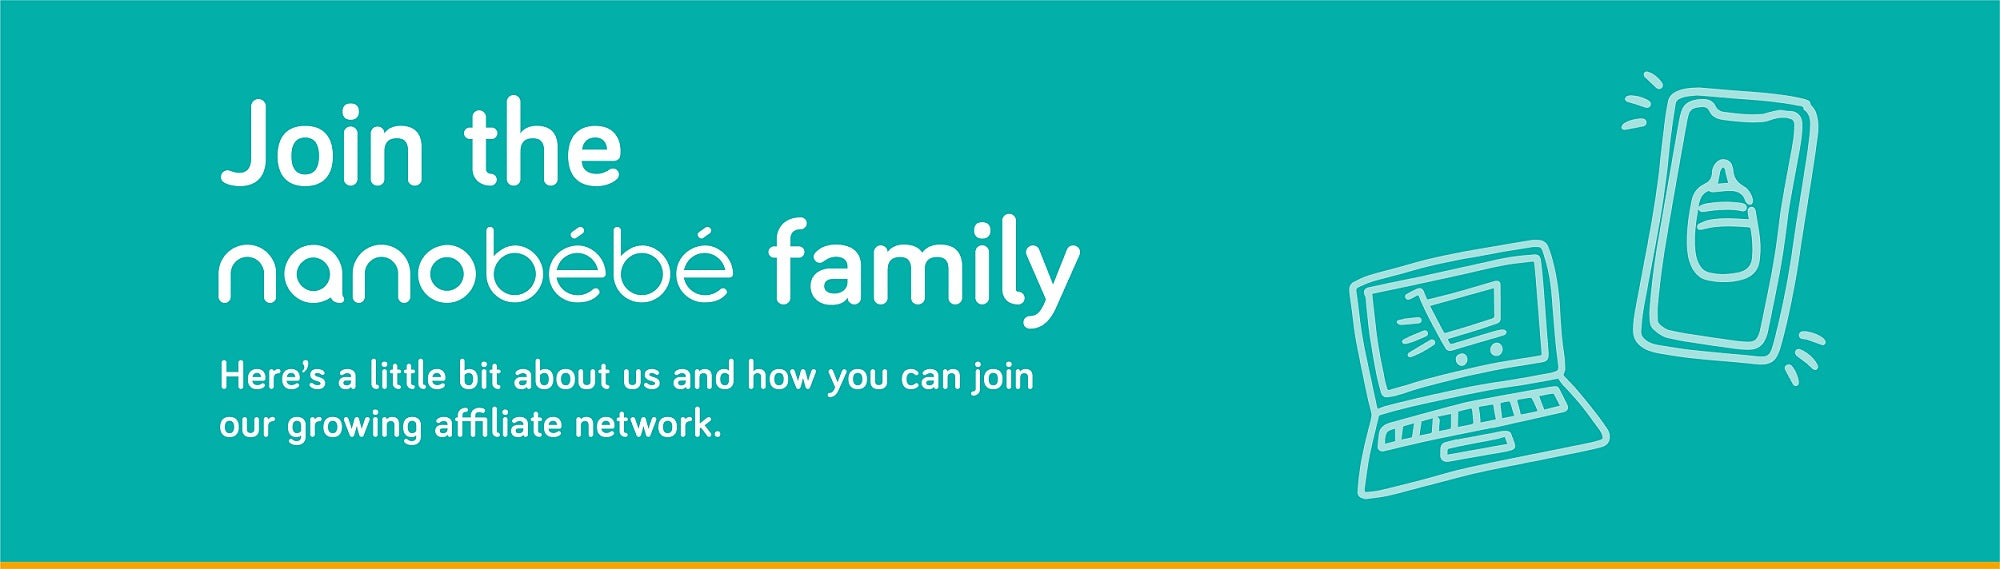 Join the Nanobebe family! Here's a little bit about us and how you can join our growing affiliate network.